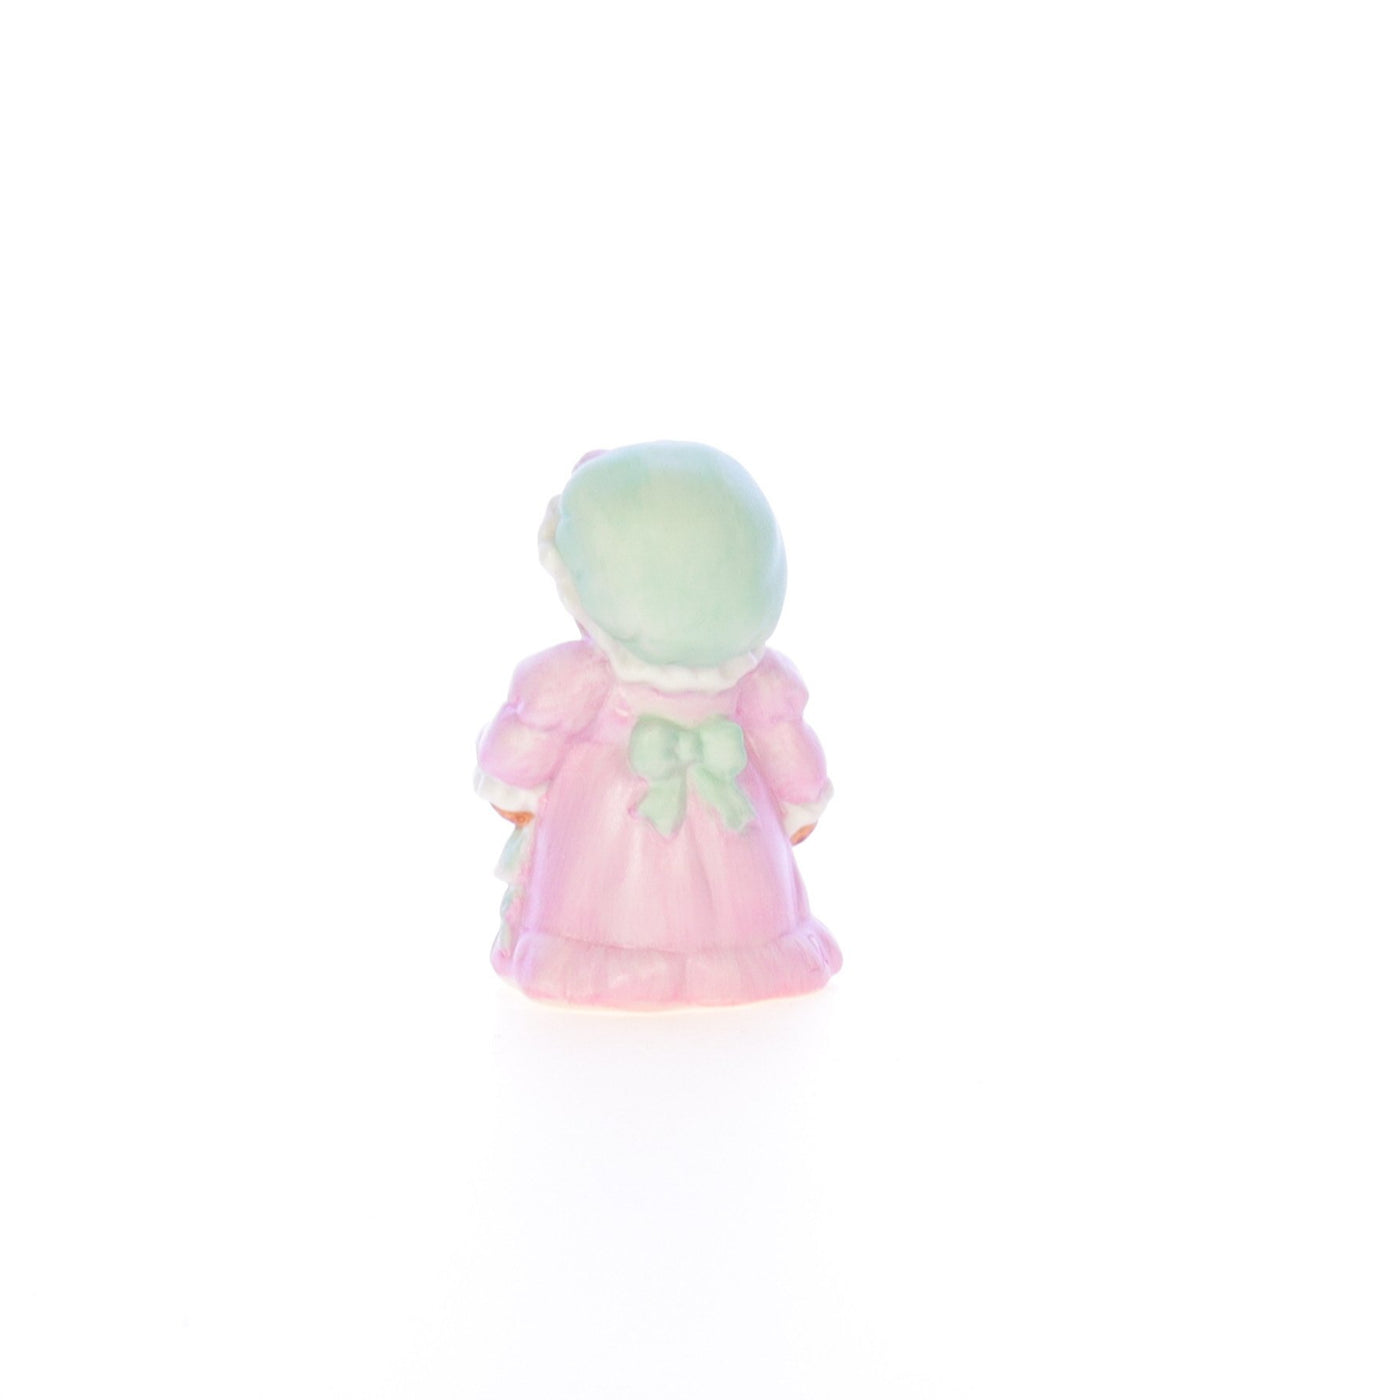 Lucy_And_Me_by_Lucy_Atwell_Porcelain_Figurine_Bear_with_Bonnet_Lucy_Unknown_006_04